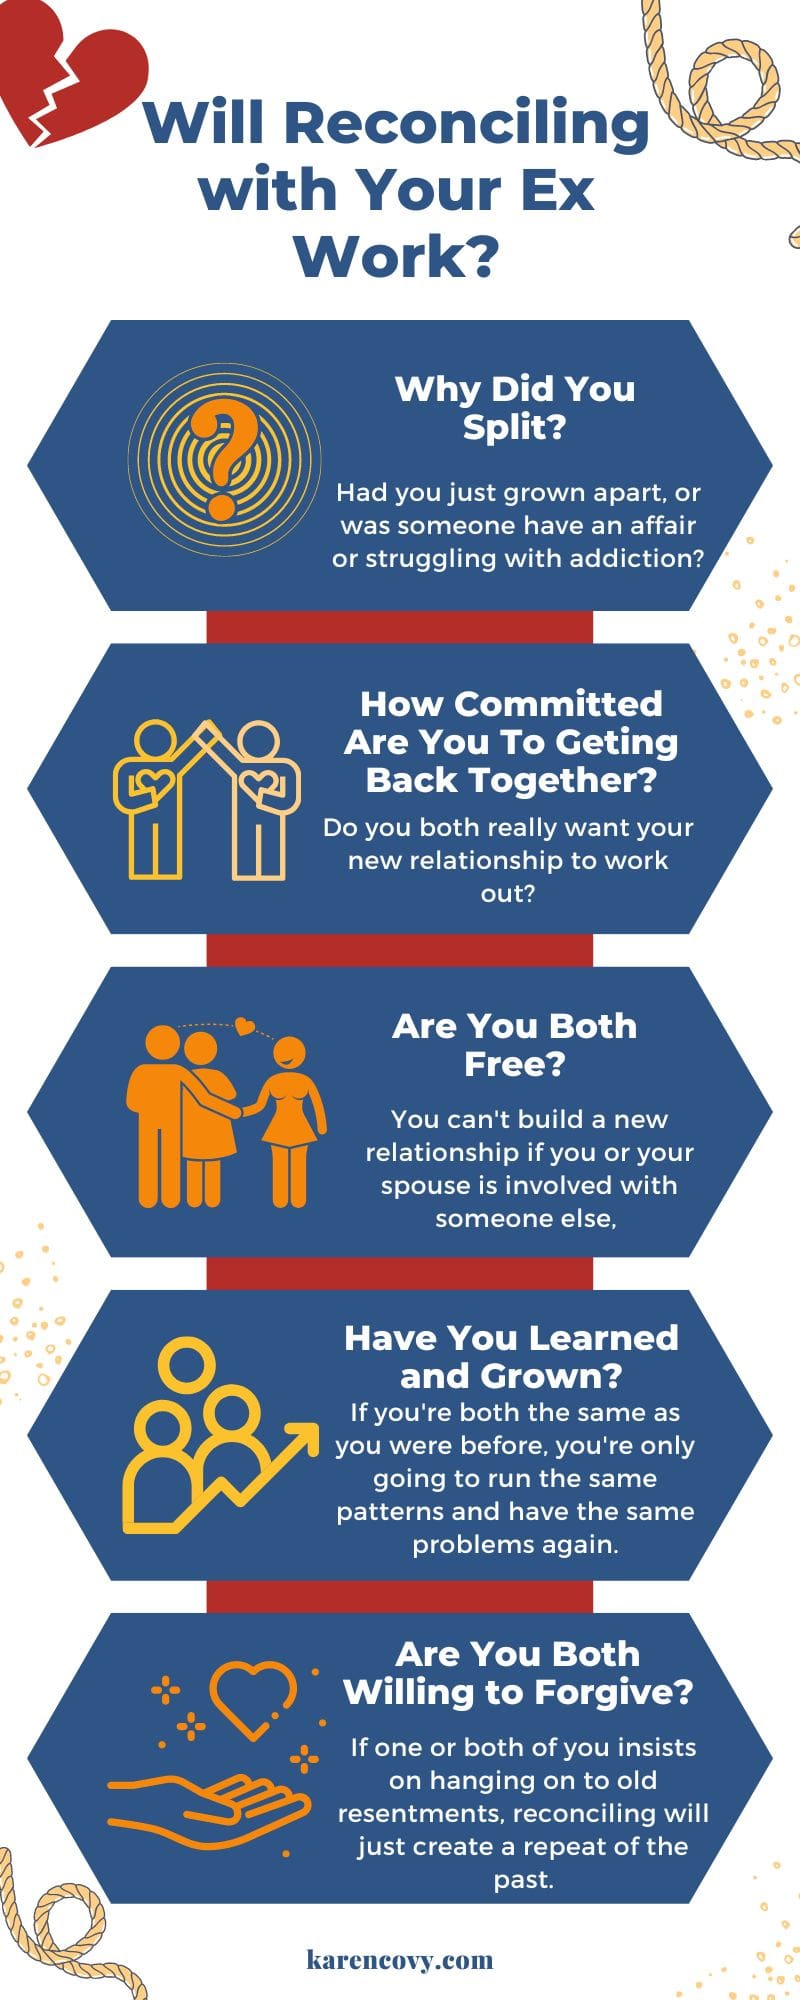 Infographic listing 5 questions to determine if reconciling with your ex will work.